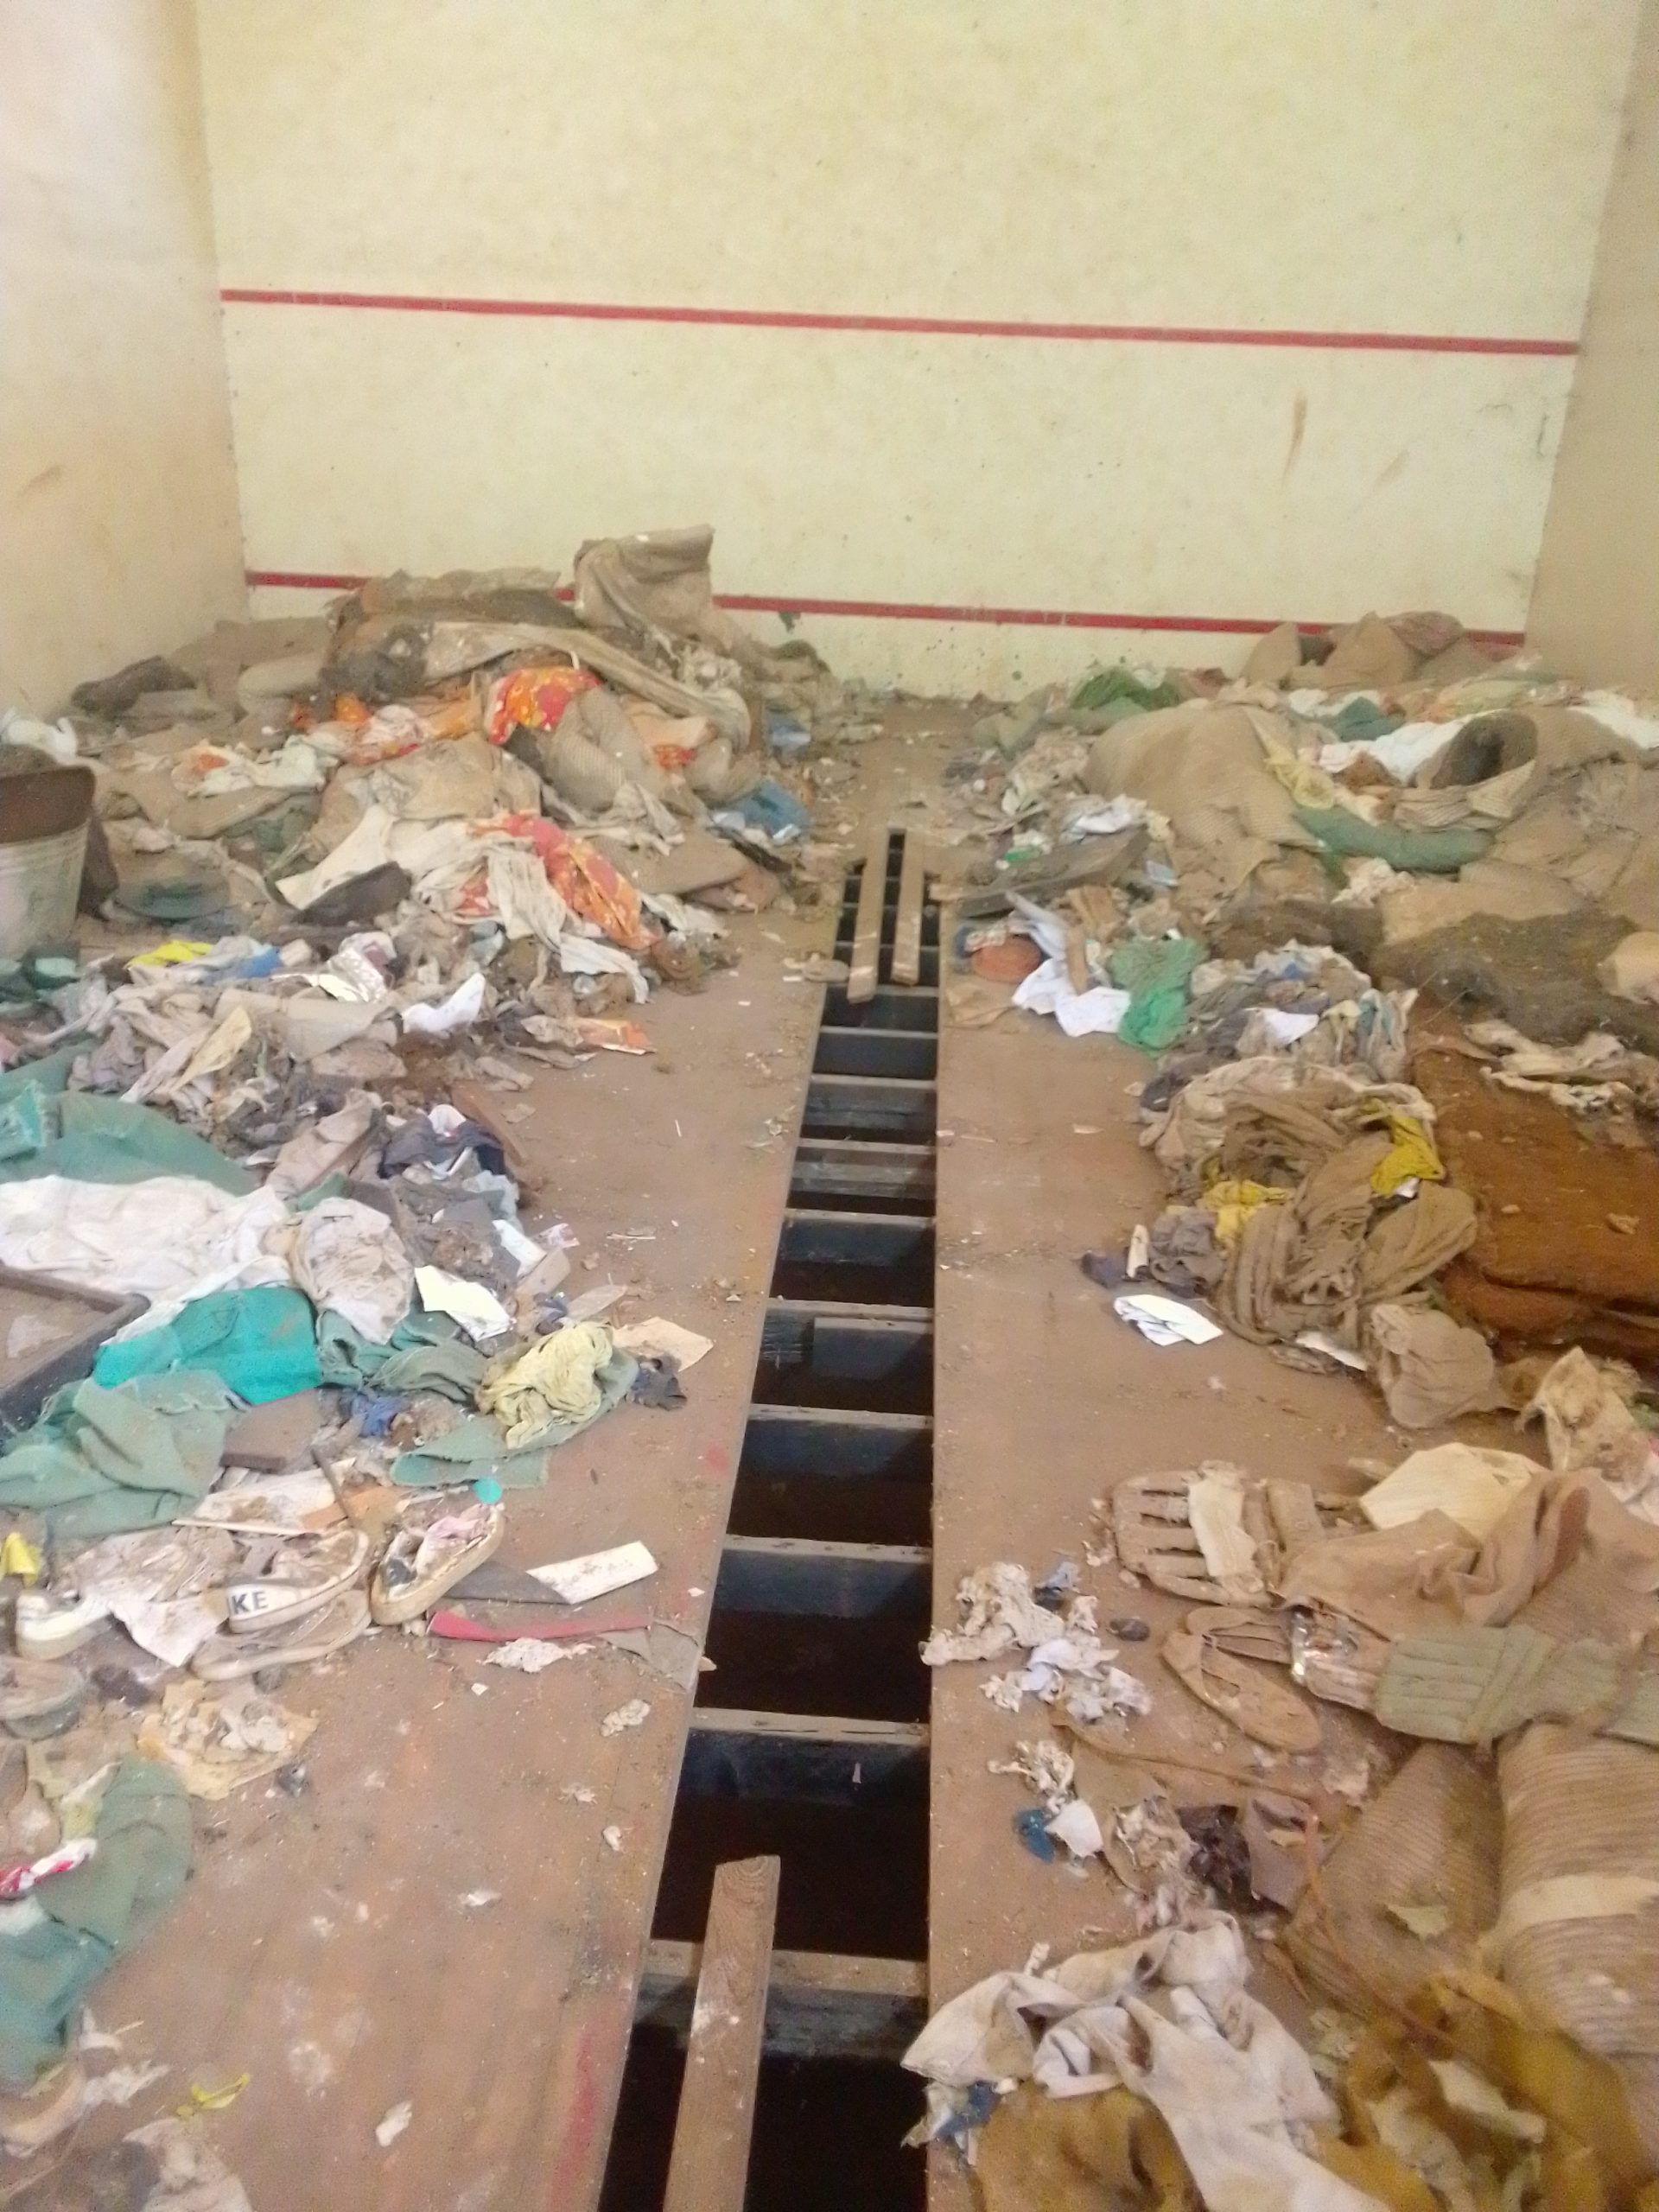 Broken squash court in Zimbabwe with rubbish all over it